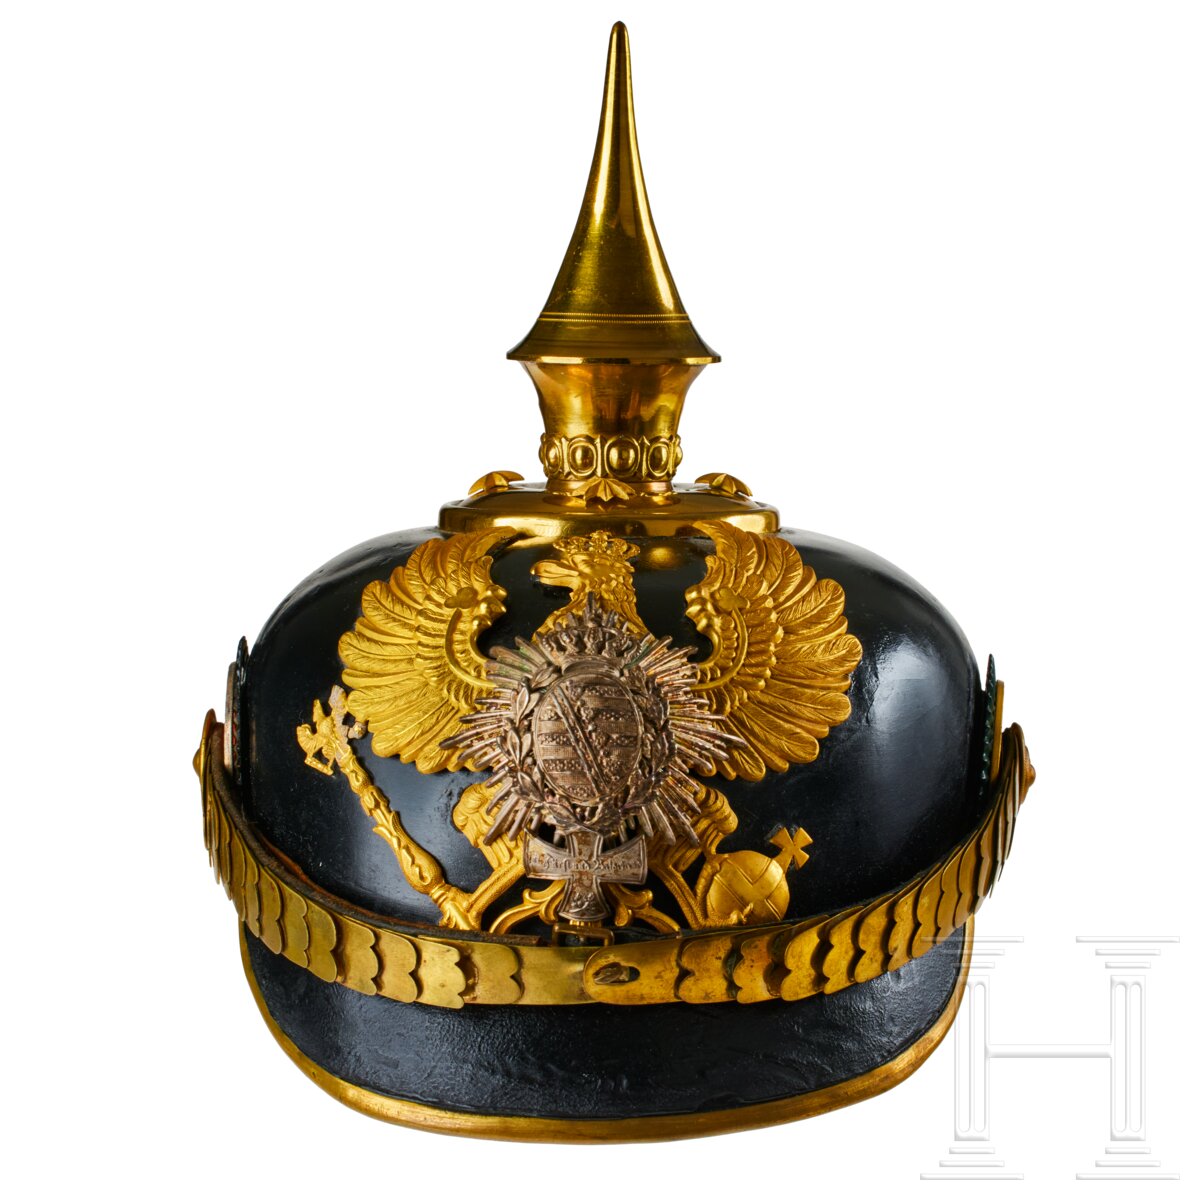 A helmet for IR 94 Saxe-Weimar Reserve Officers - Image 2 of 9